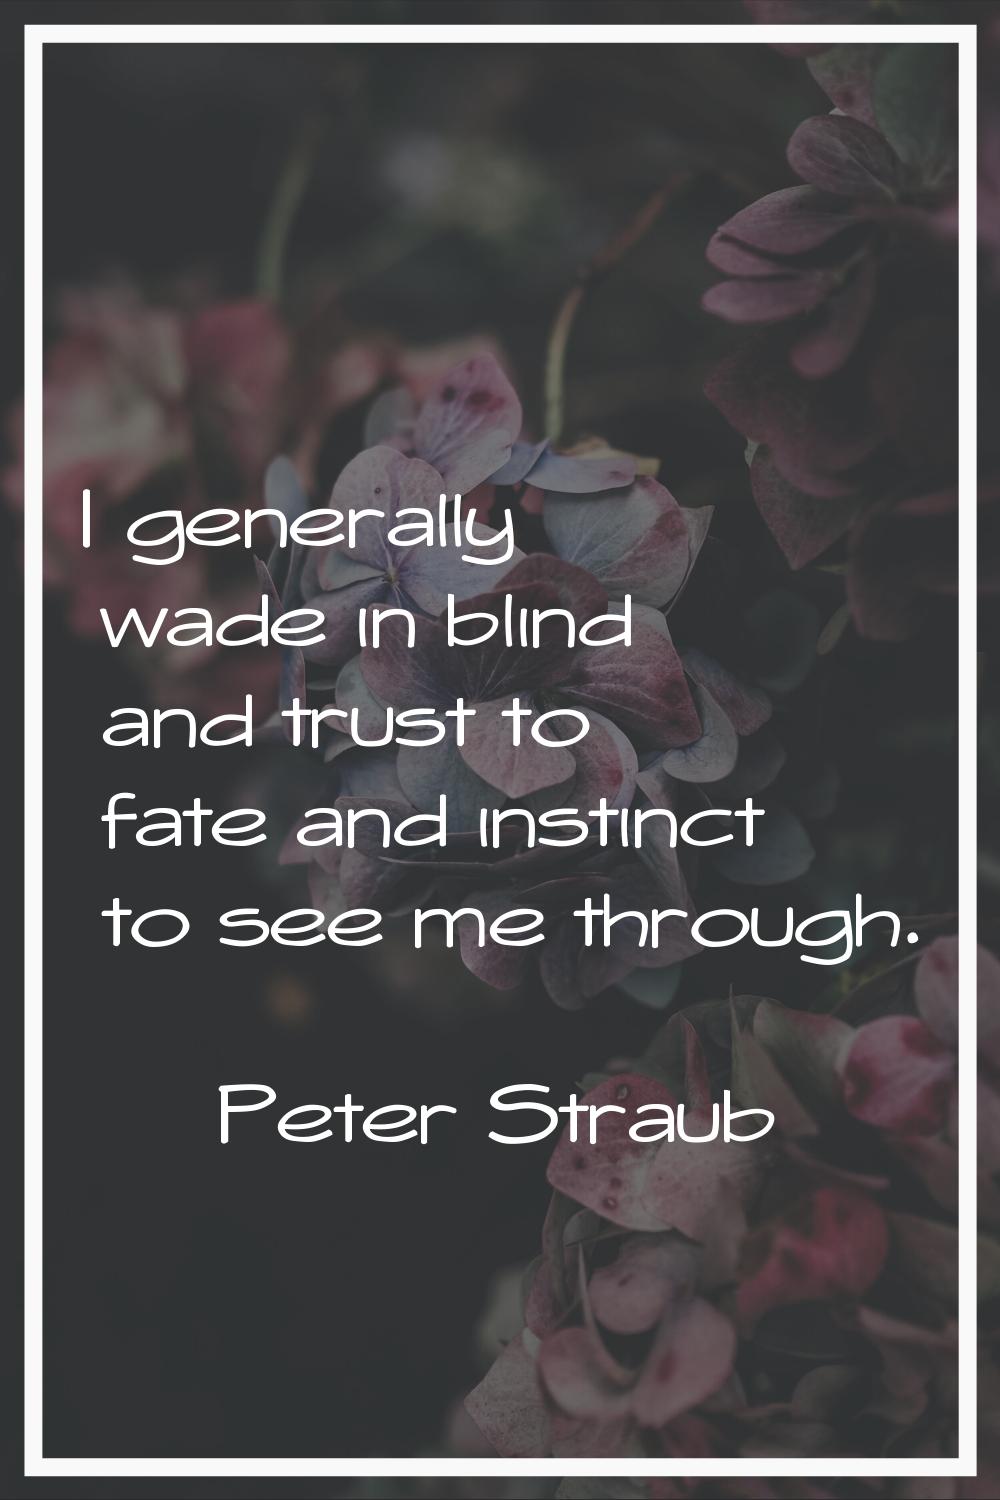 I generally wade in blind and trust to fate and instinct to see me through.